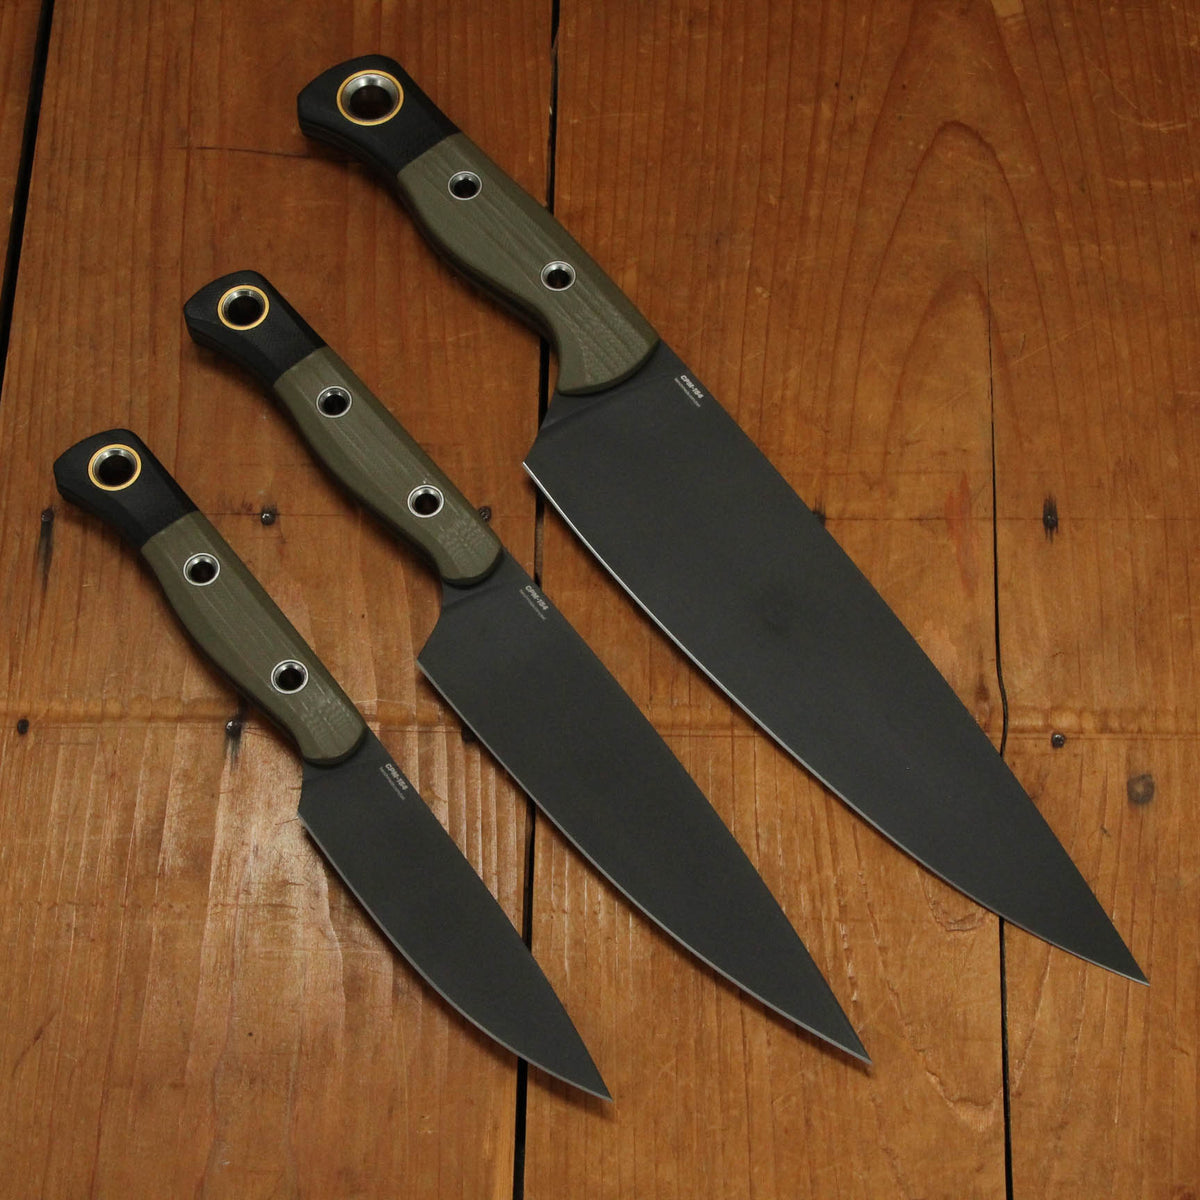 Benchmade Cutlery Drop Point CPM-154 Fixed Blade OD Green G10 Handle Knife Set - 3 Pieces